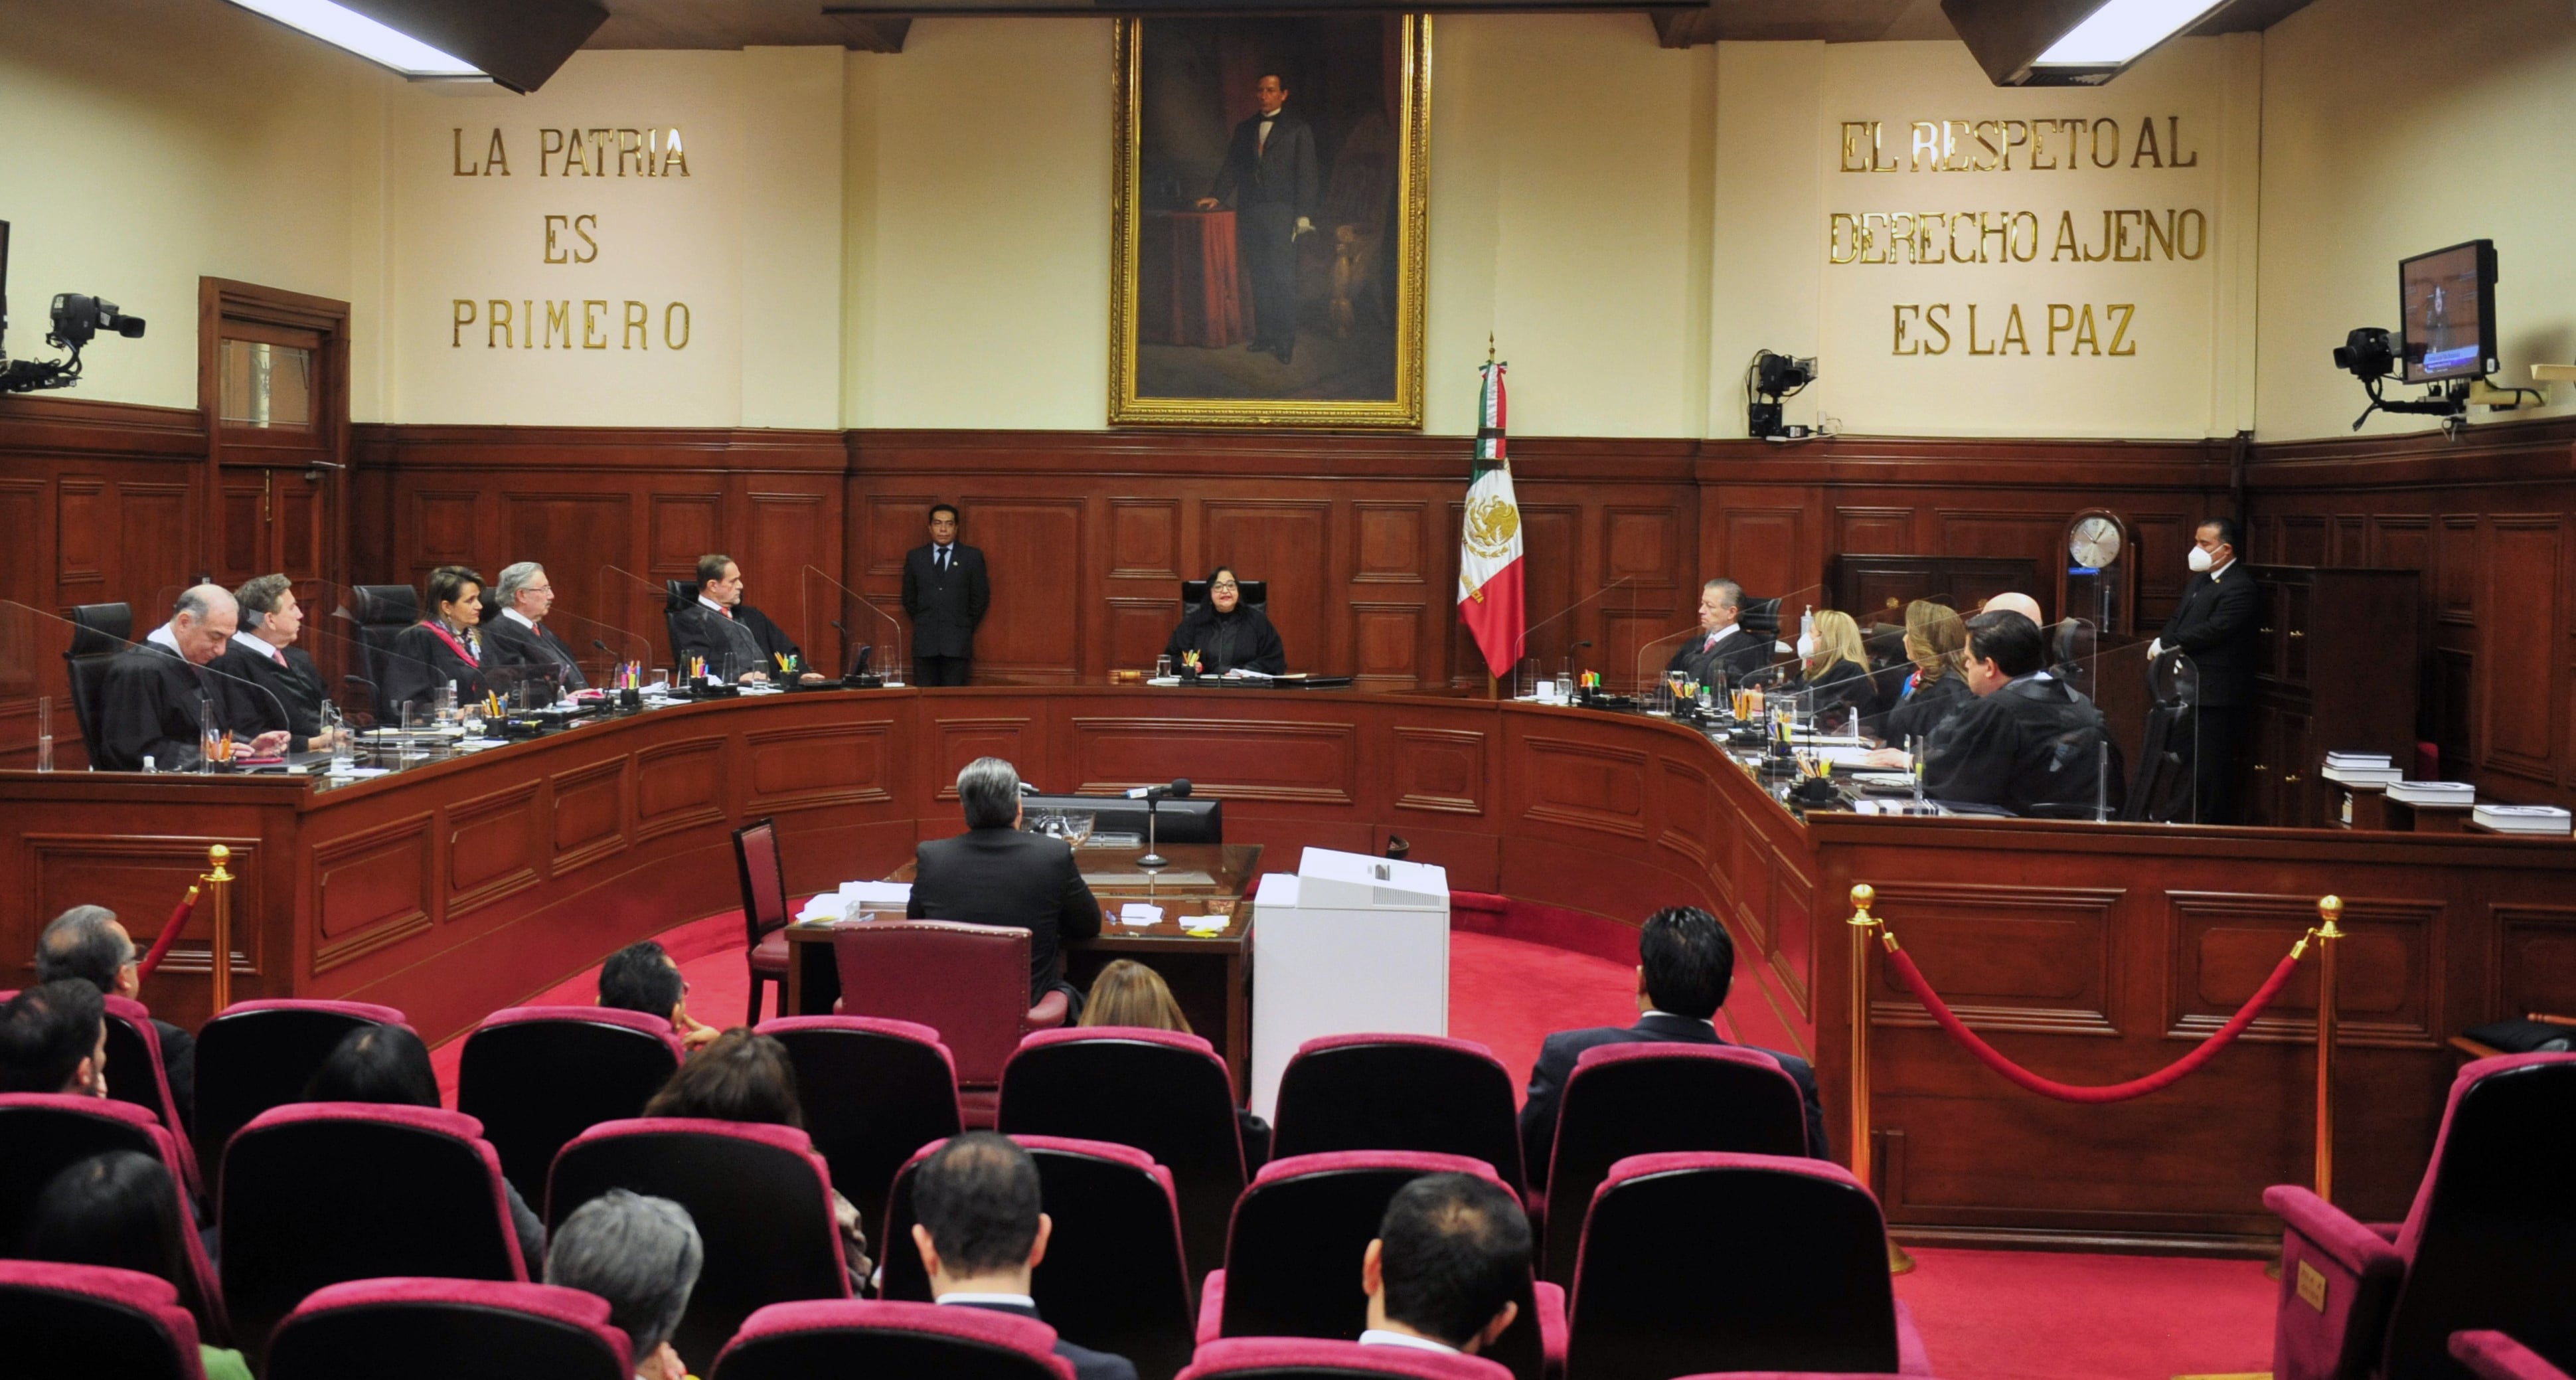 The Supreme Court of Justice of the Nation chaired by Norma Lucía Piña (SCJN)